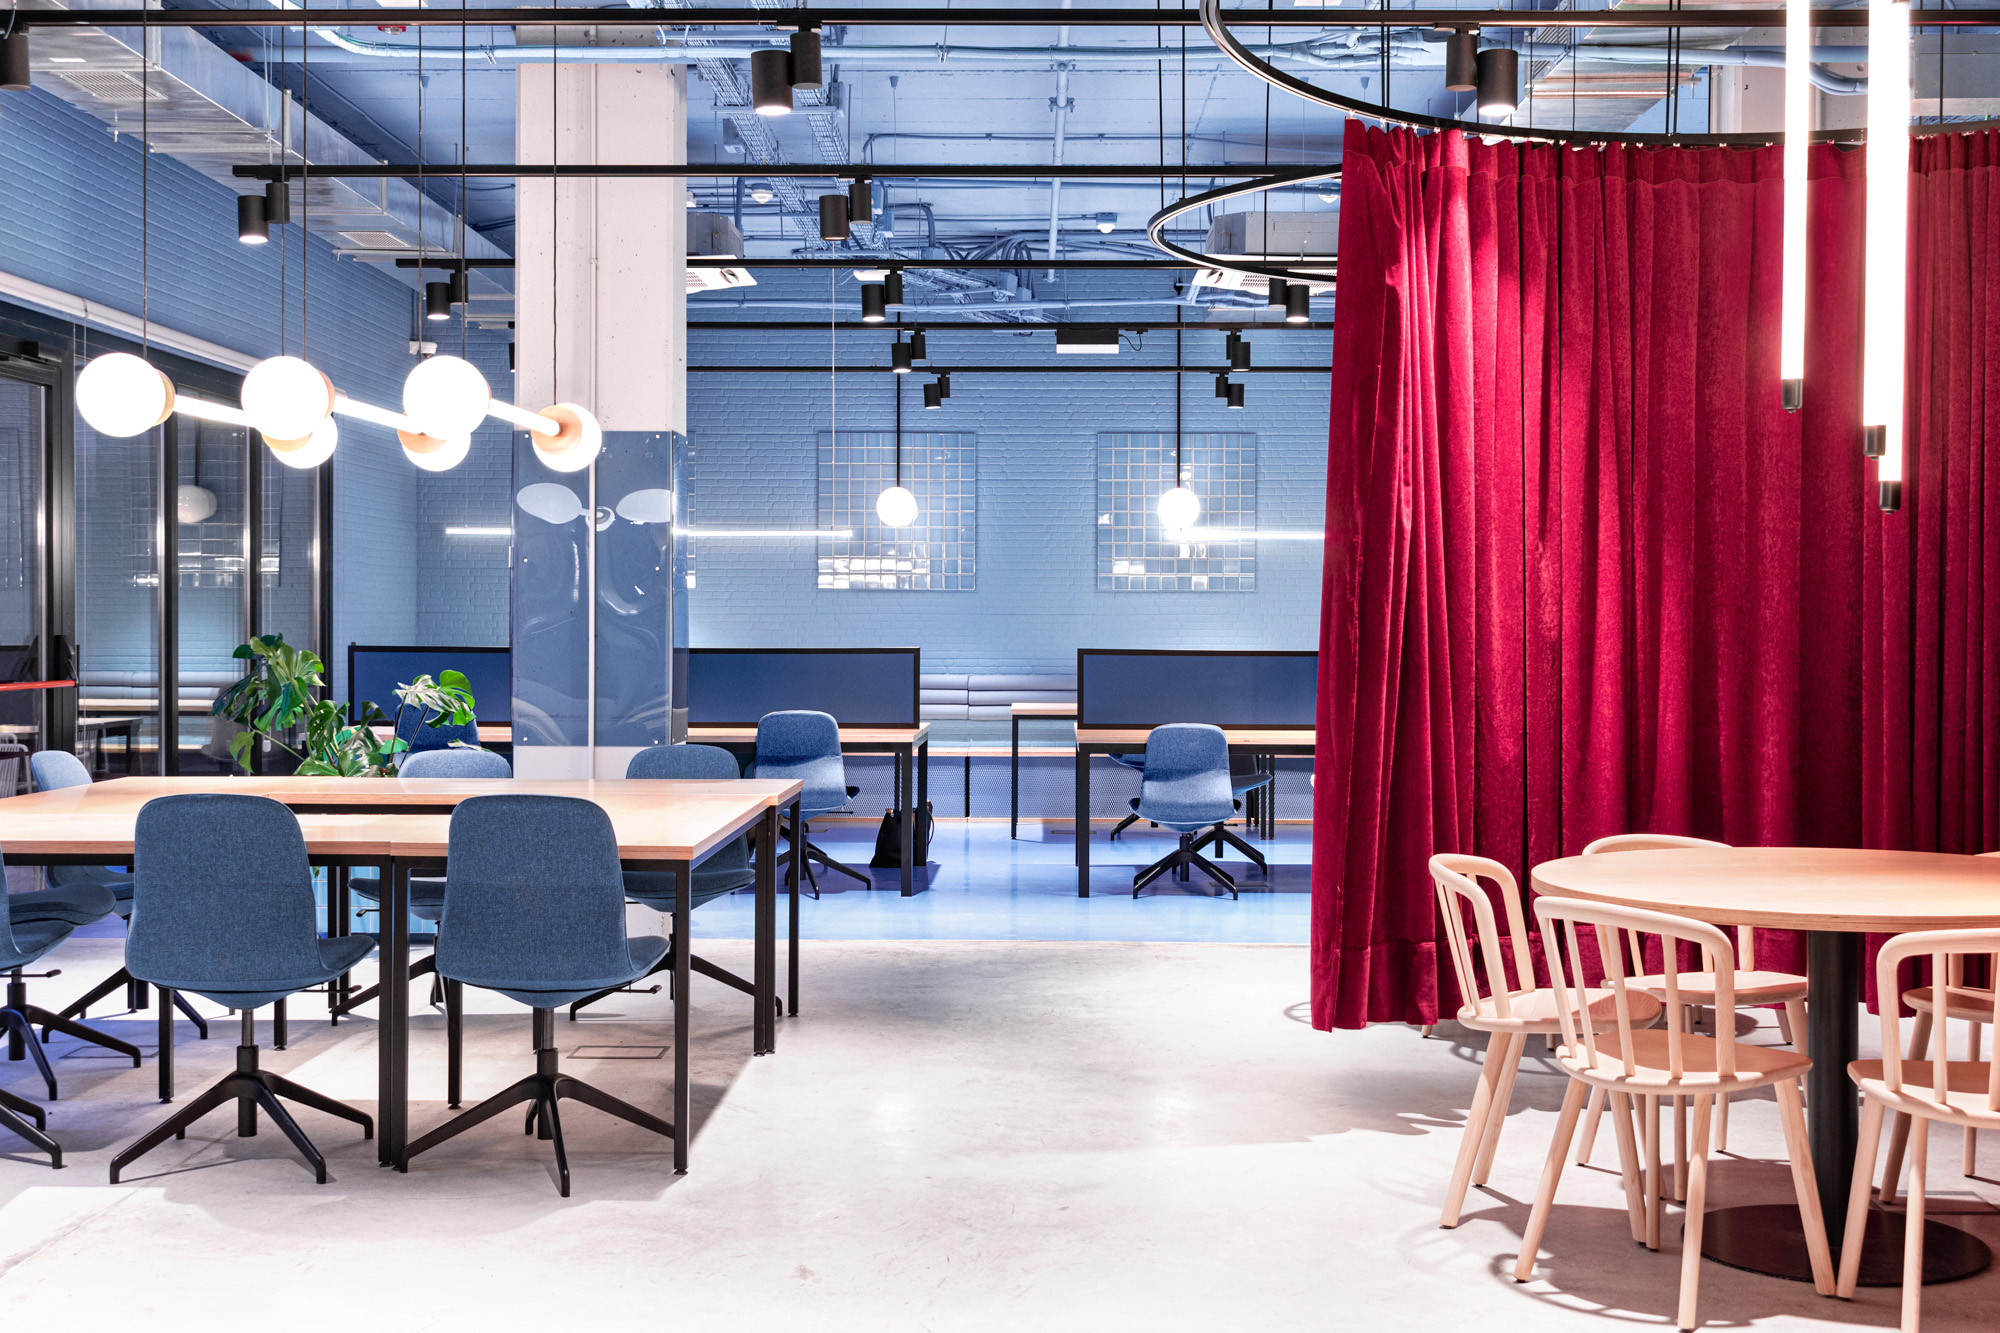 Study spaces employs blue and reds by Masquespacio